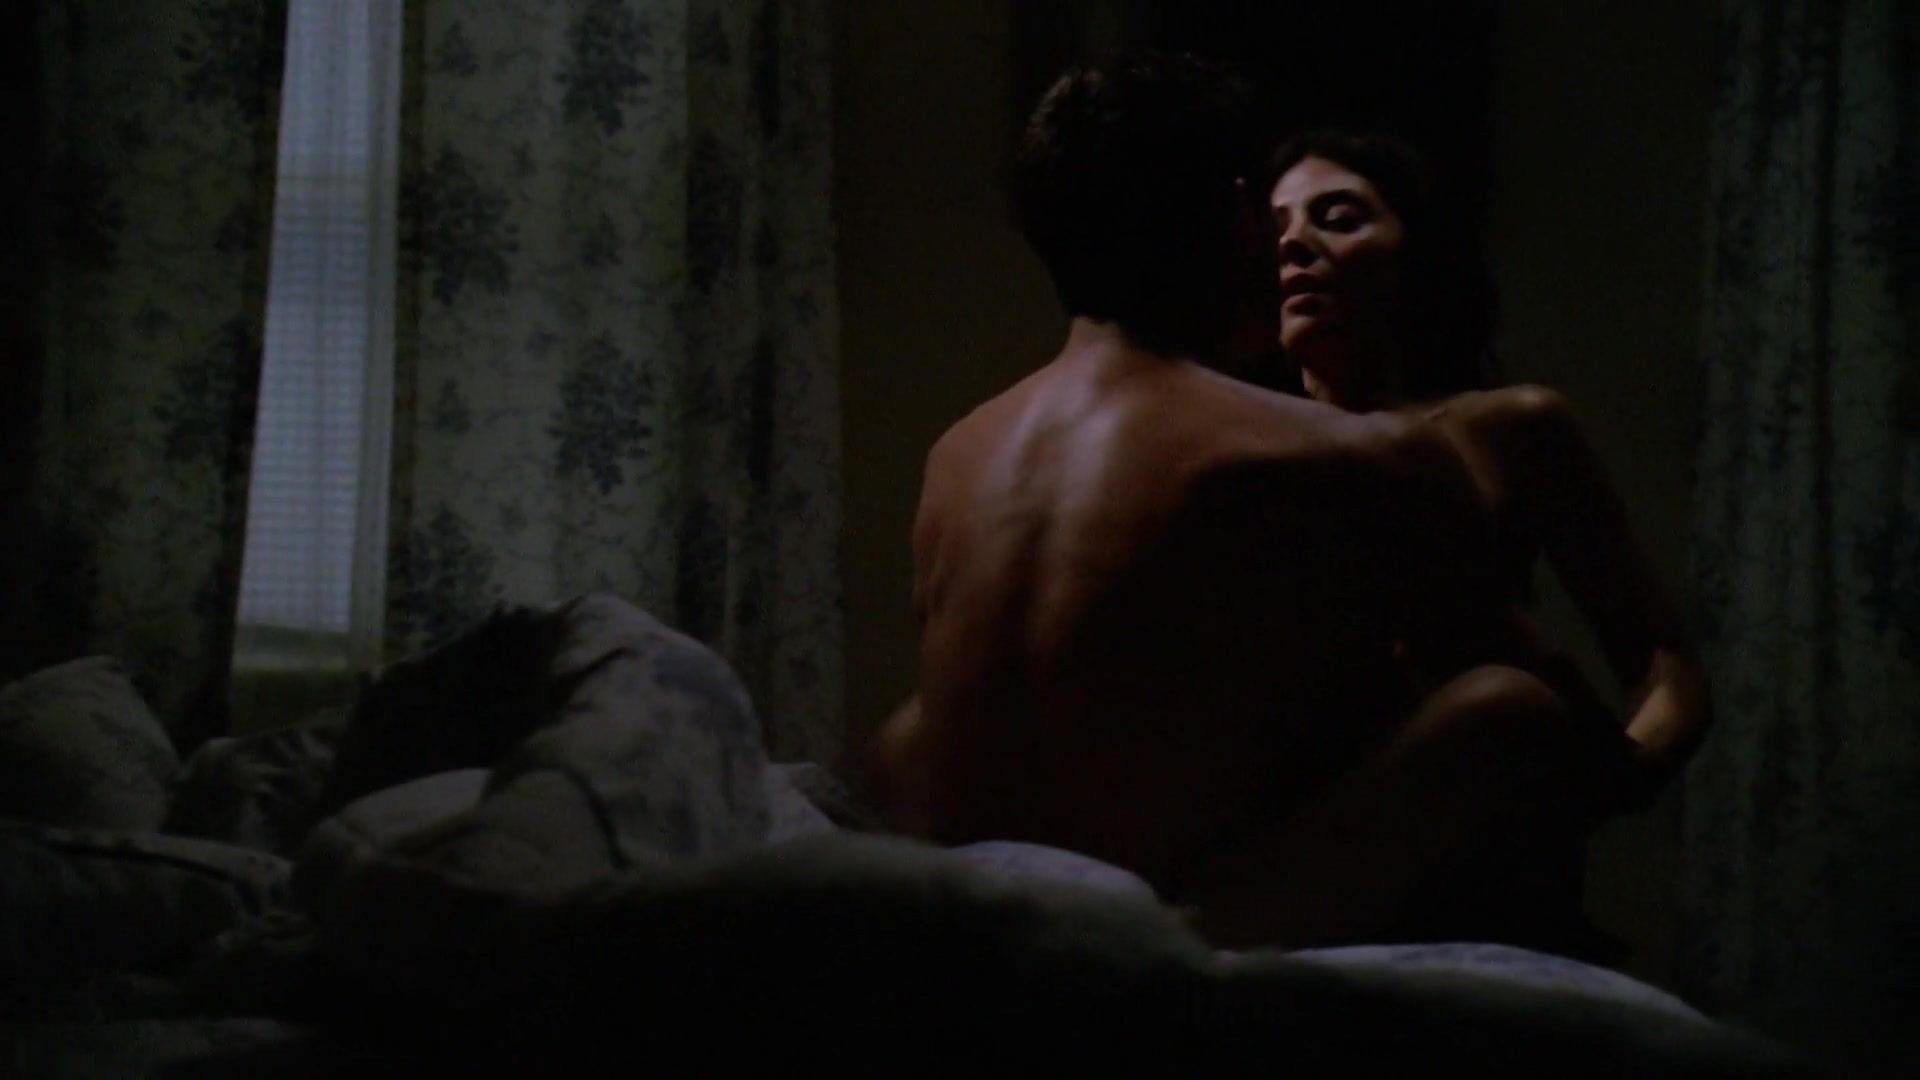 Hot Whores Sexy Callie Thorne naked -The Wire s02e06 (2003) Adulter.Club